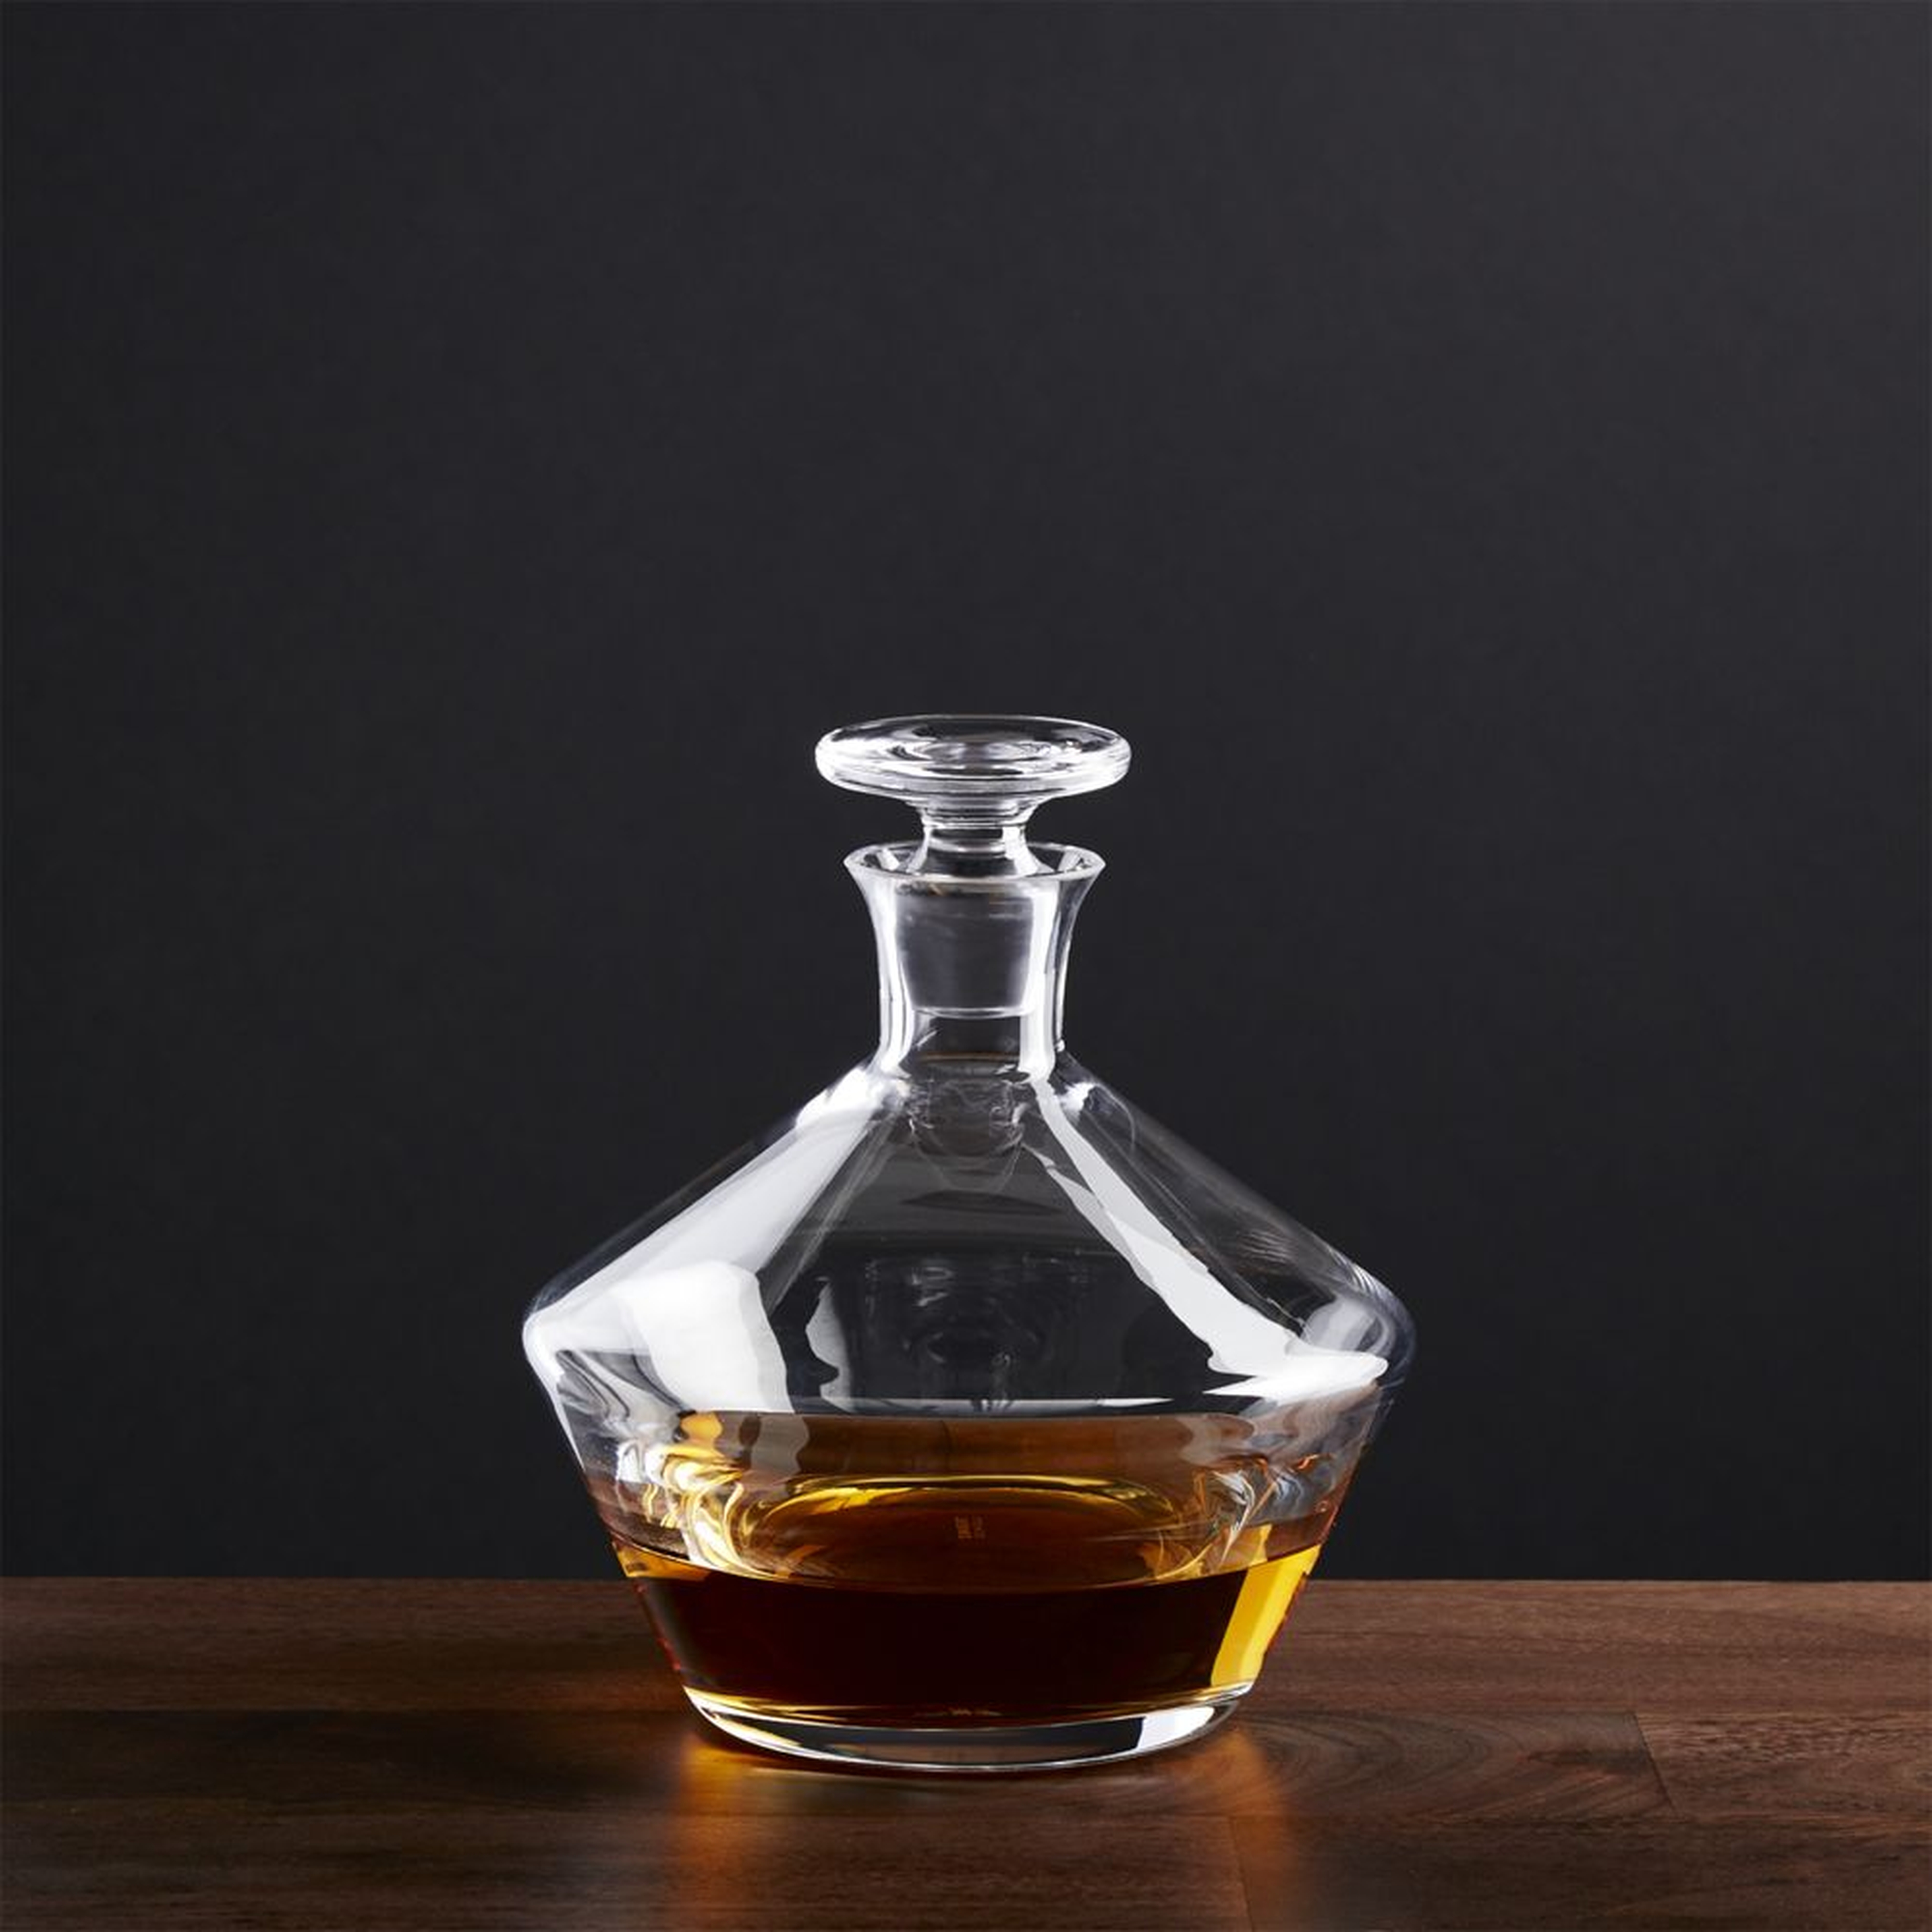 Tour Decanter - Crate and Barrel